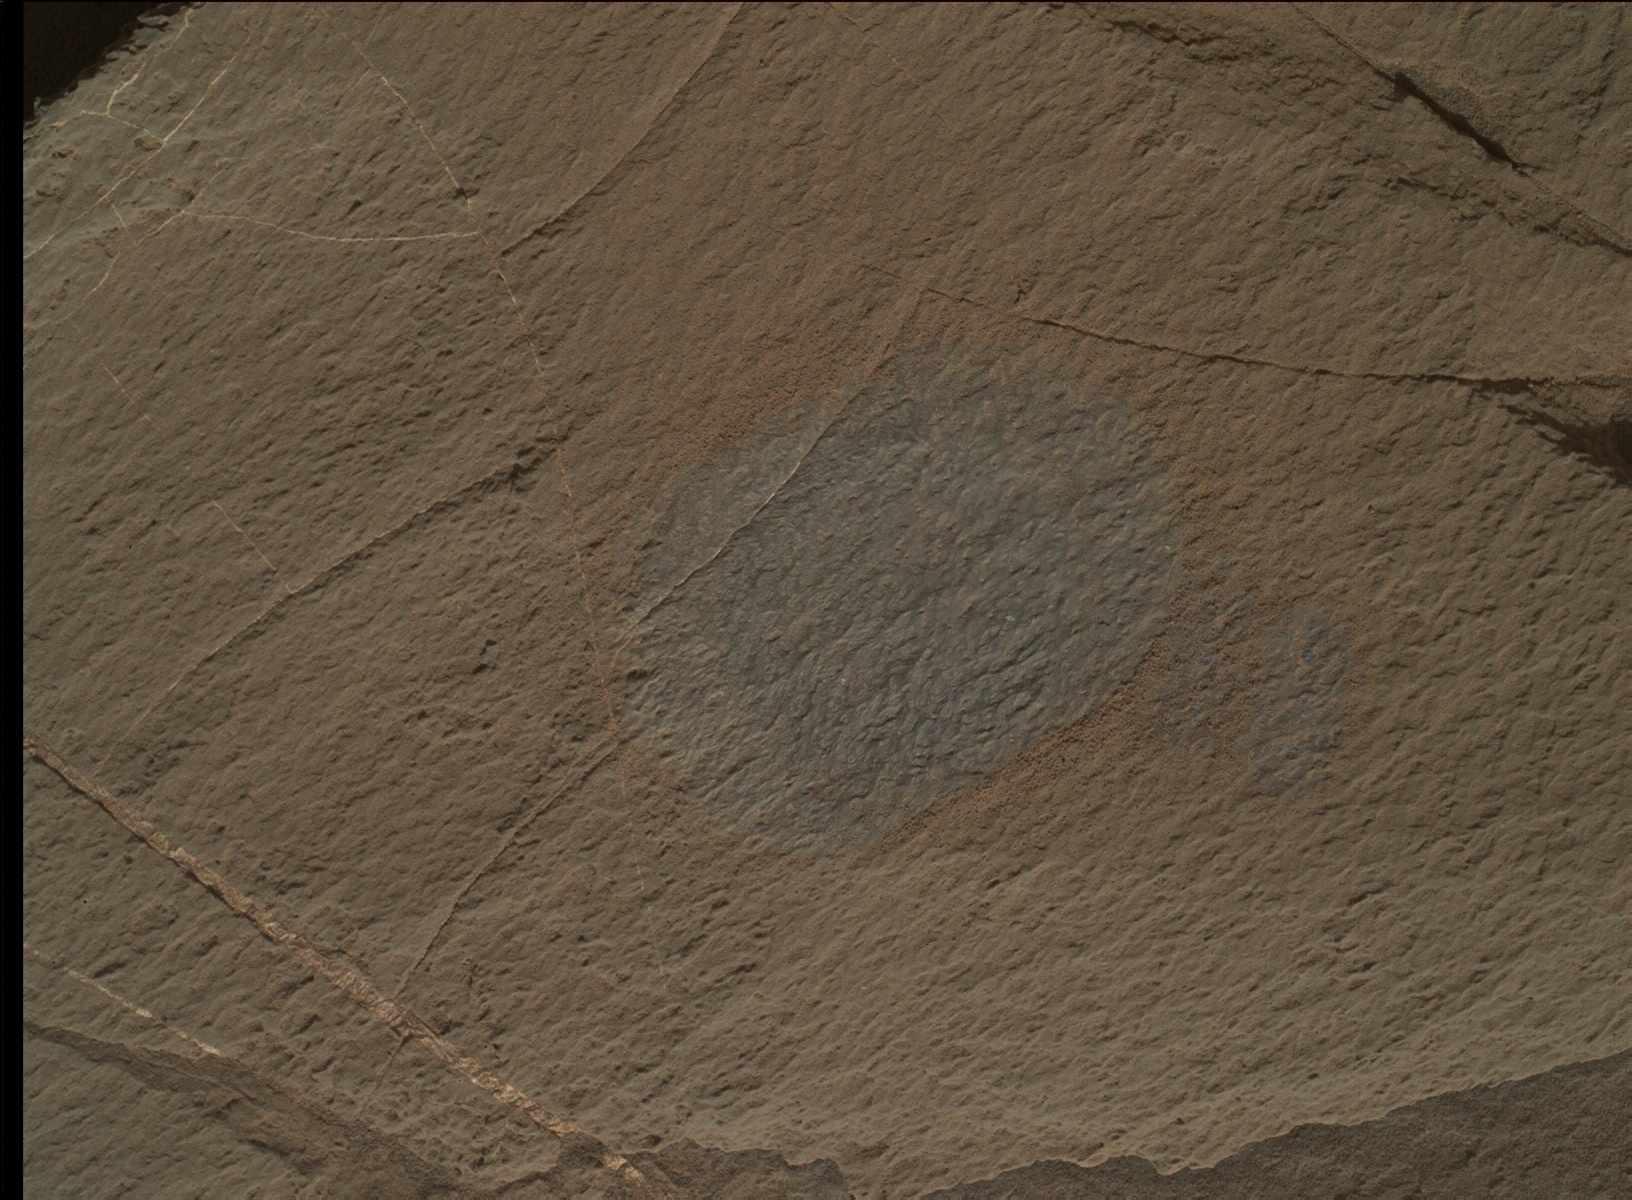 Nasa's Mars rover Curiosity acquired this image using its Mars Hand Lens Imager (MAHLI) on Sol 1266